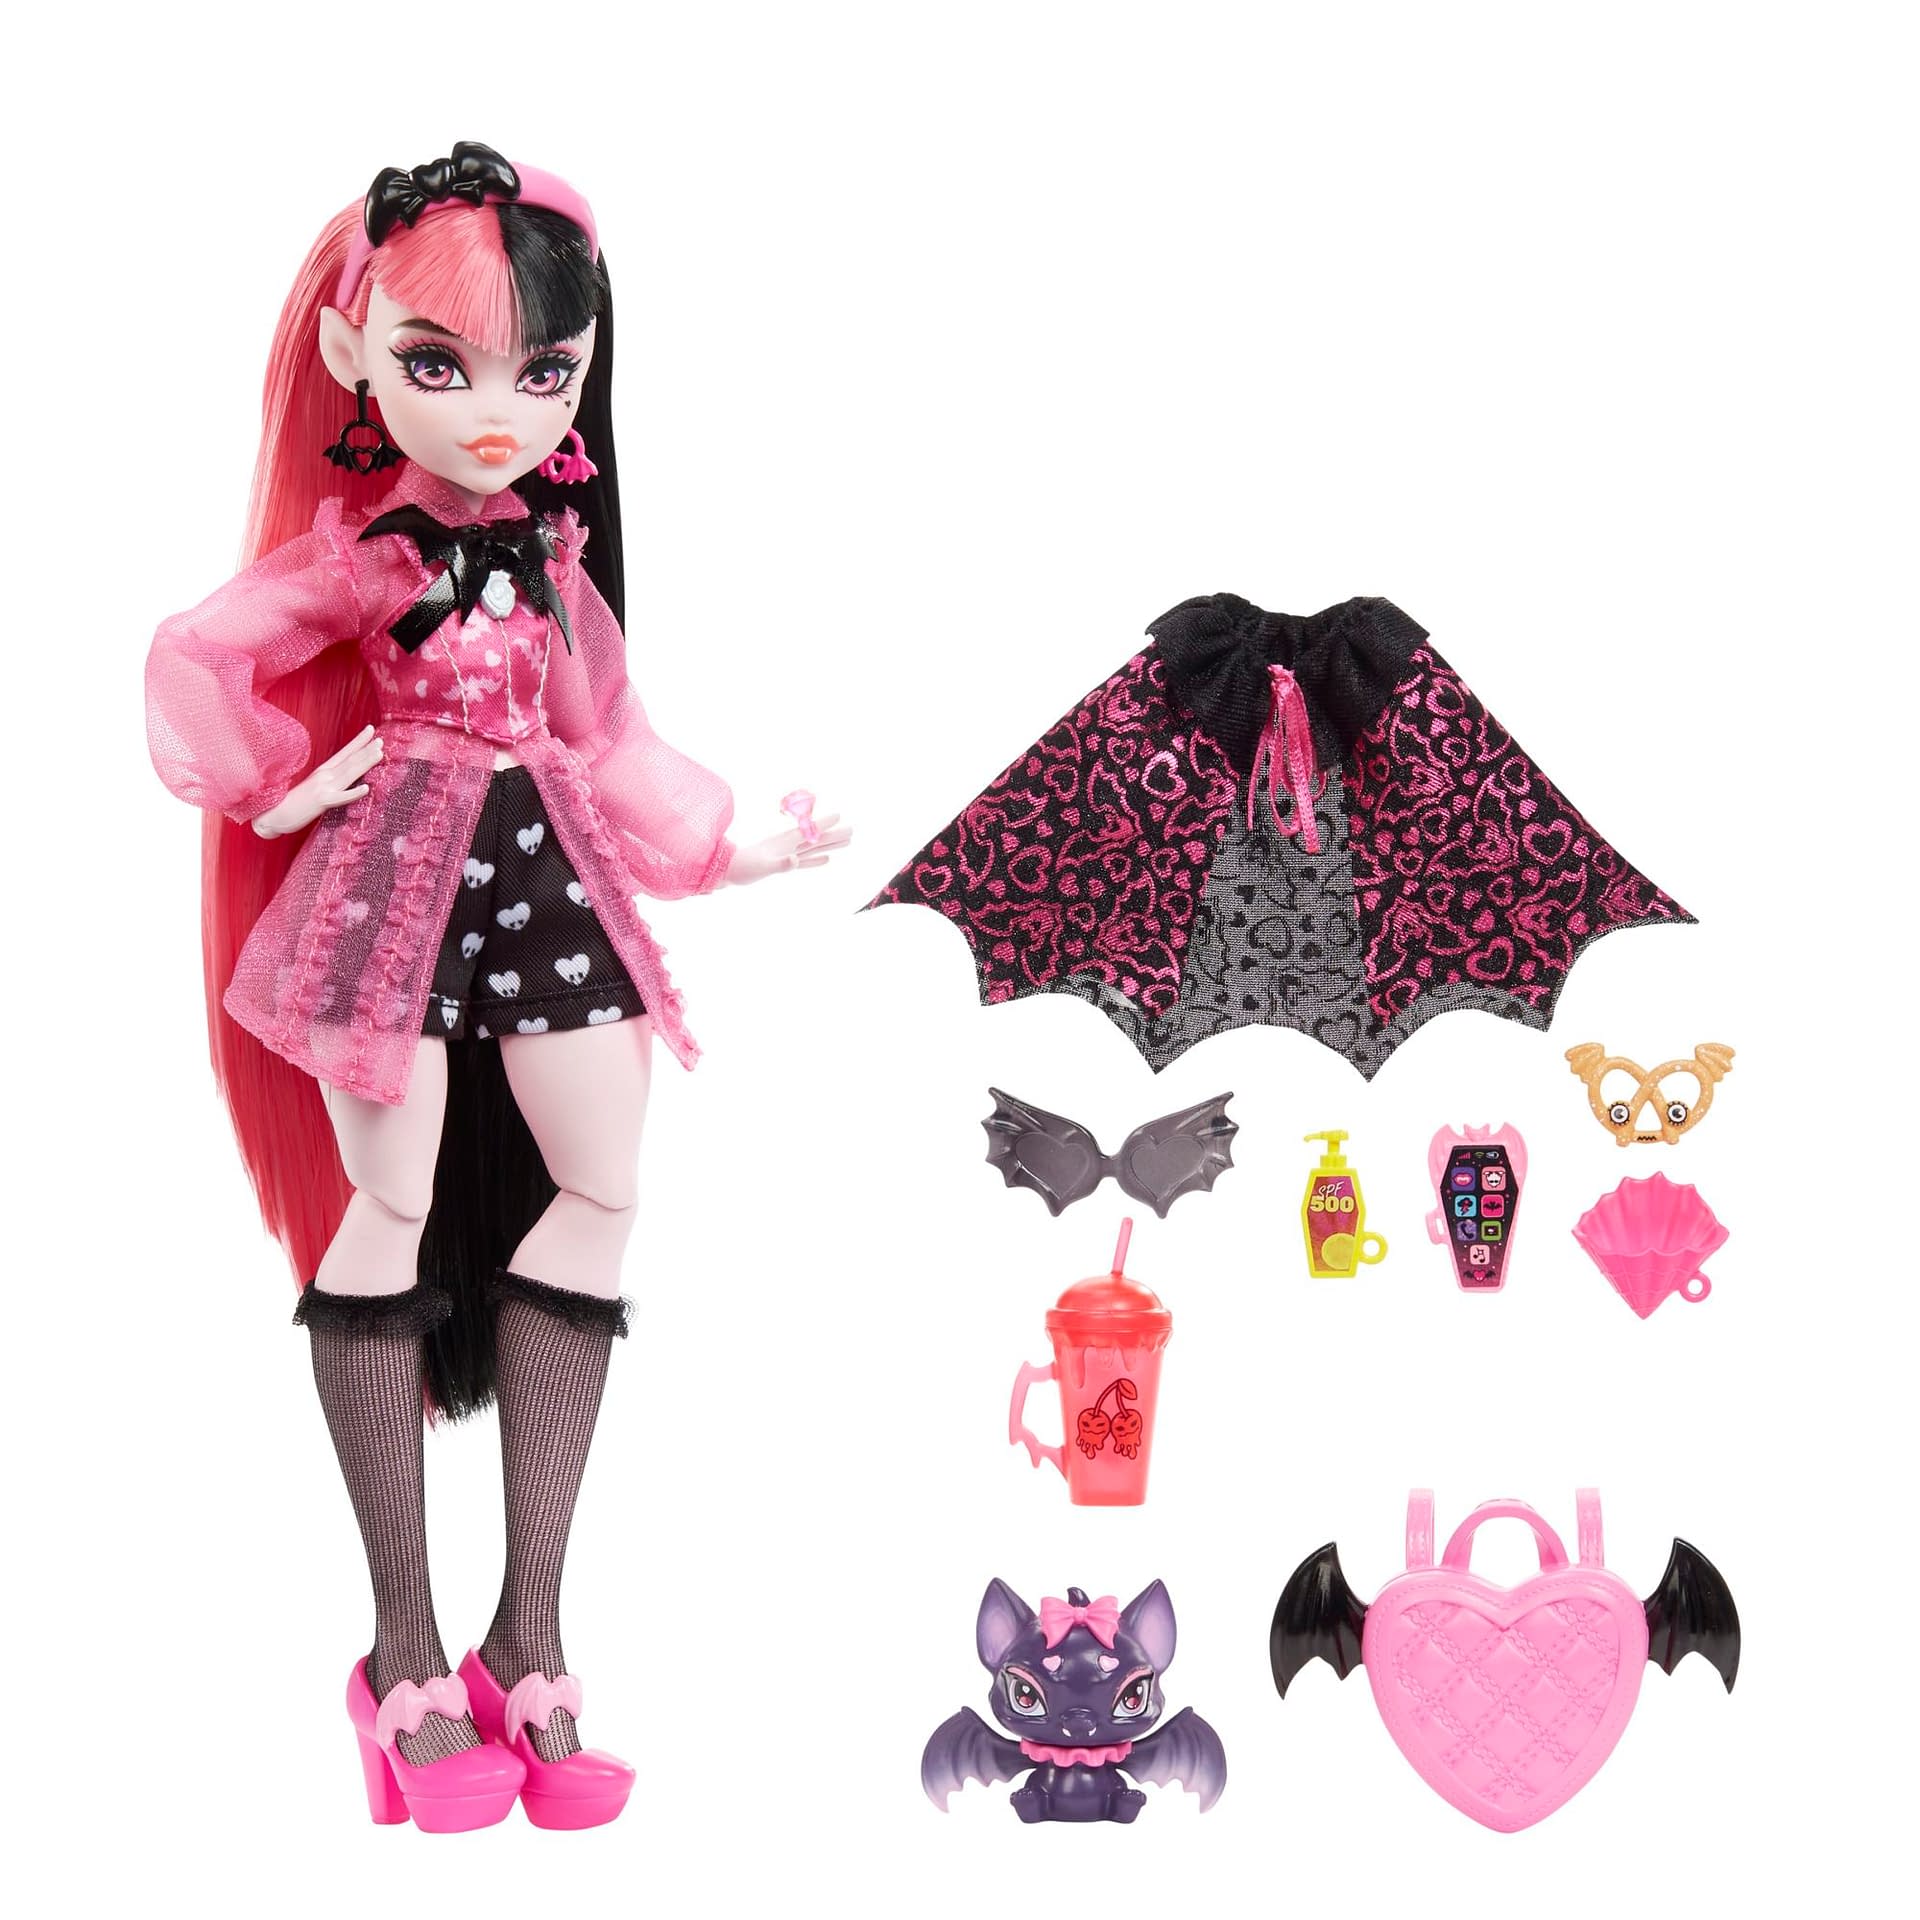 Star-studded turnout to Monster High 2 premiereToy World Magazine